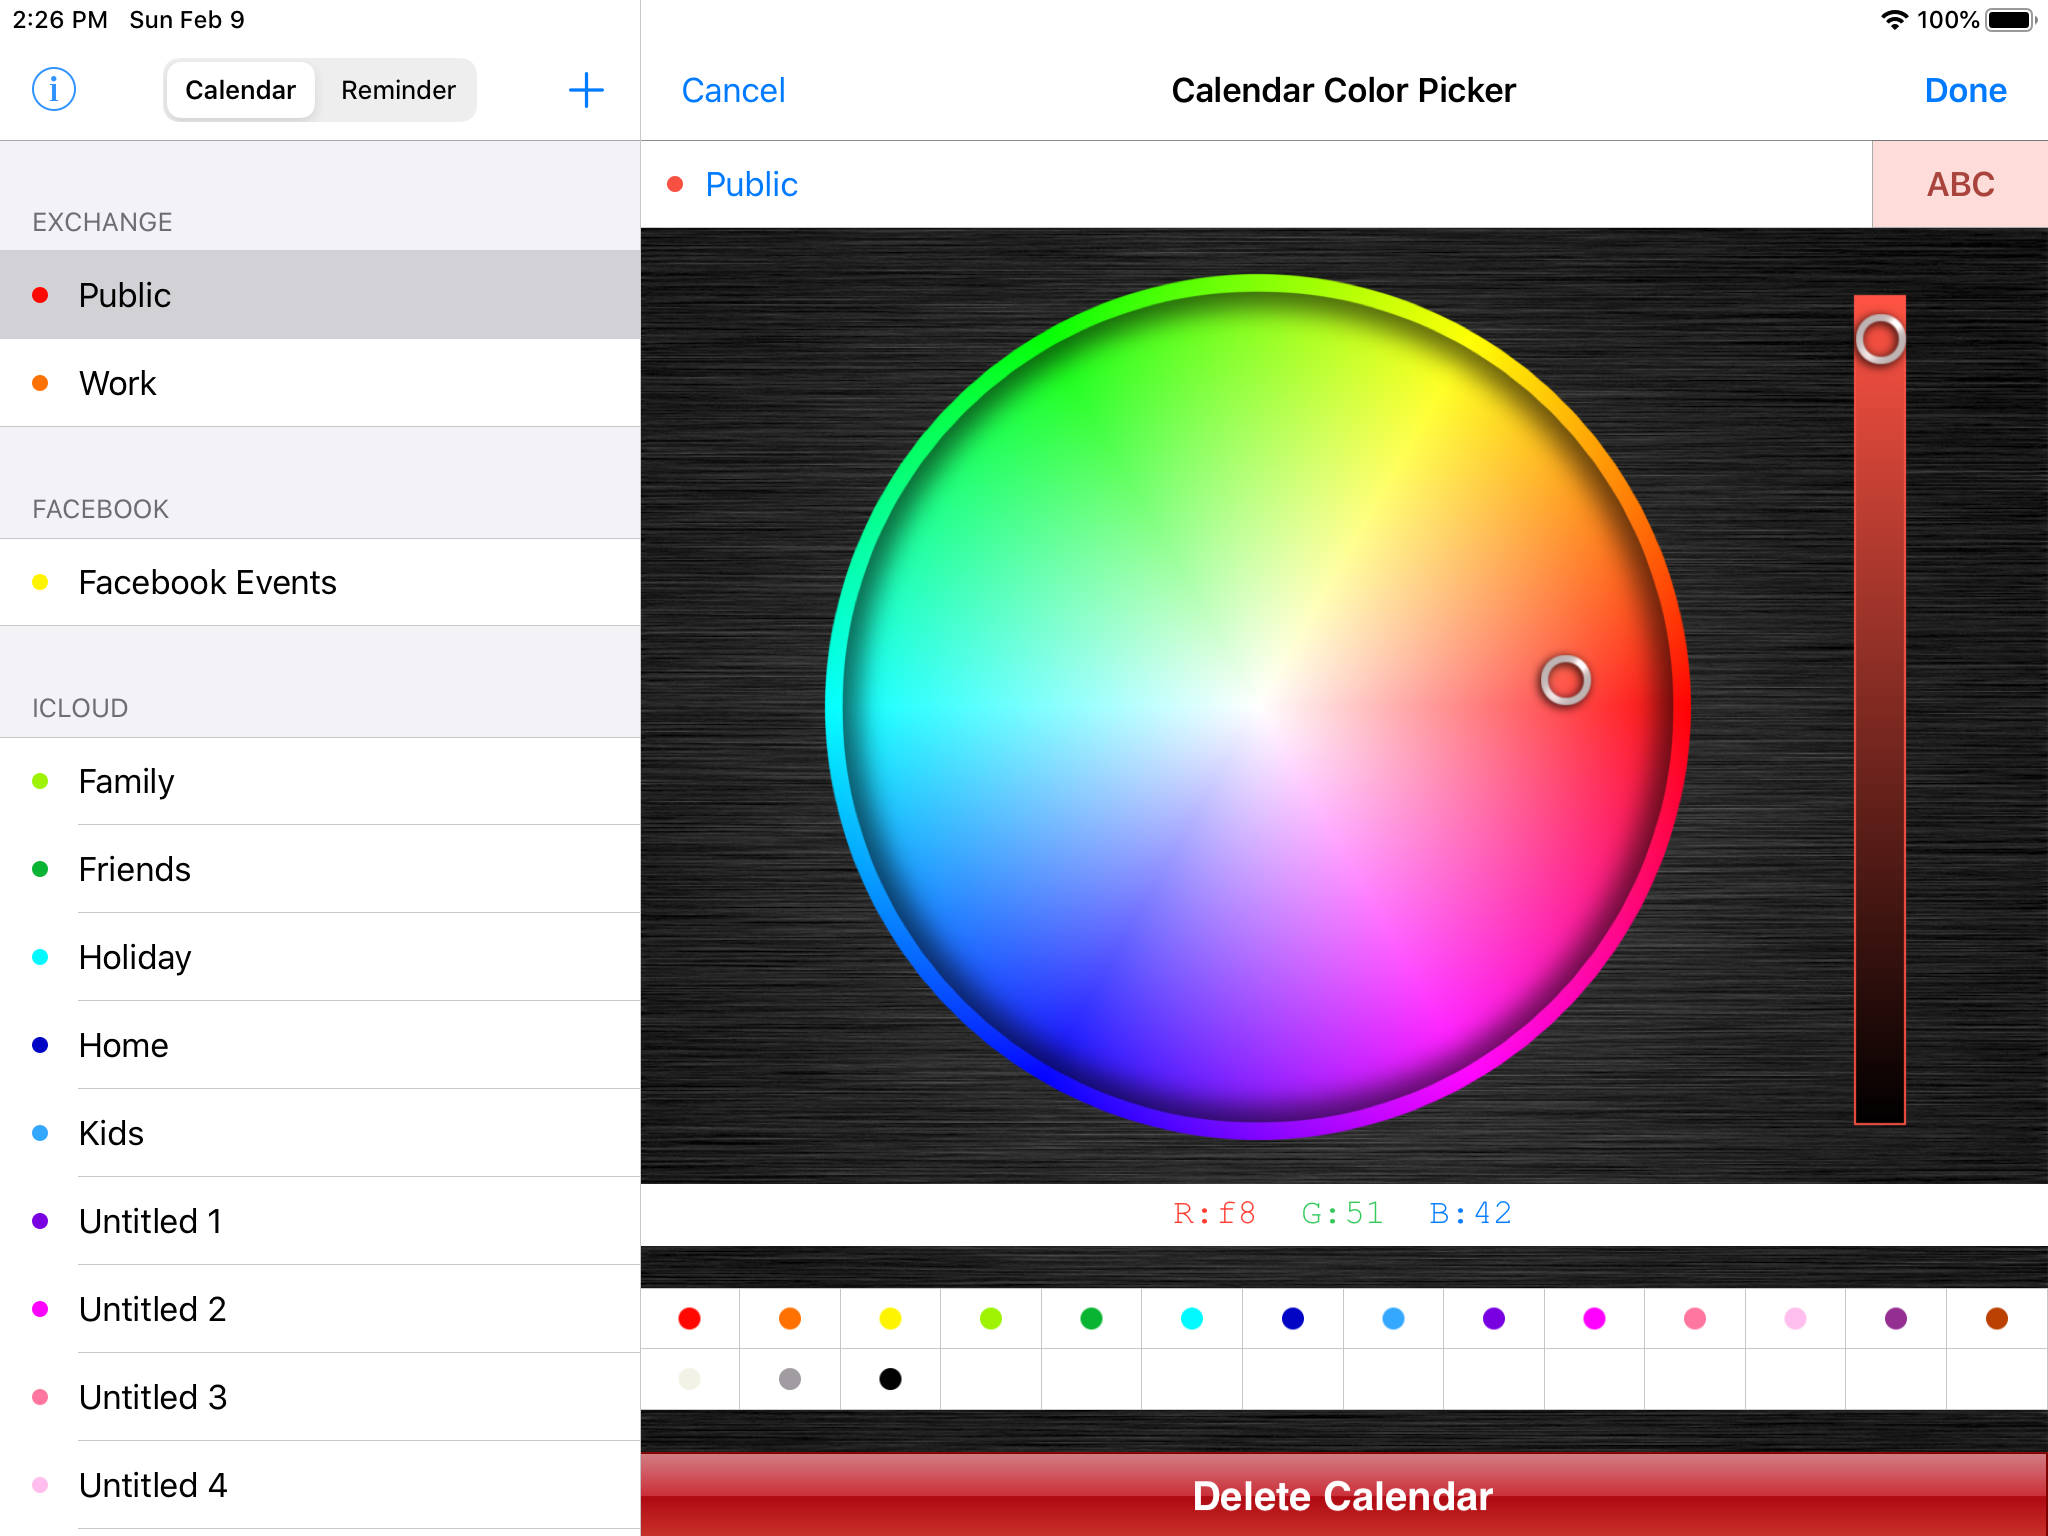 online rgb color picker from image